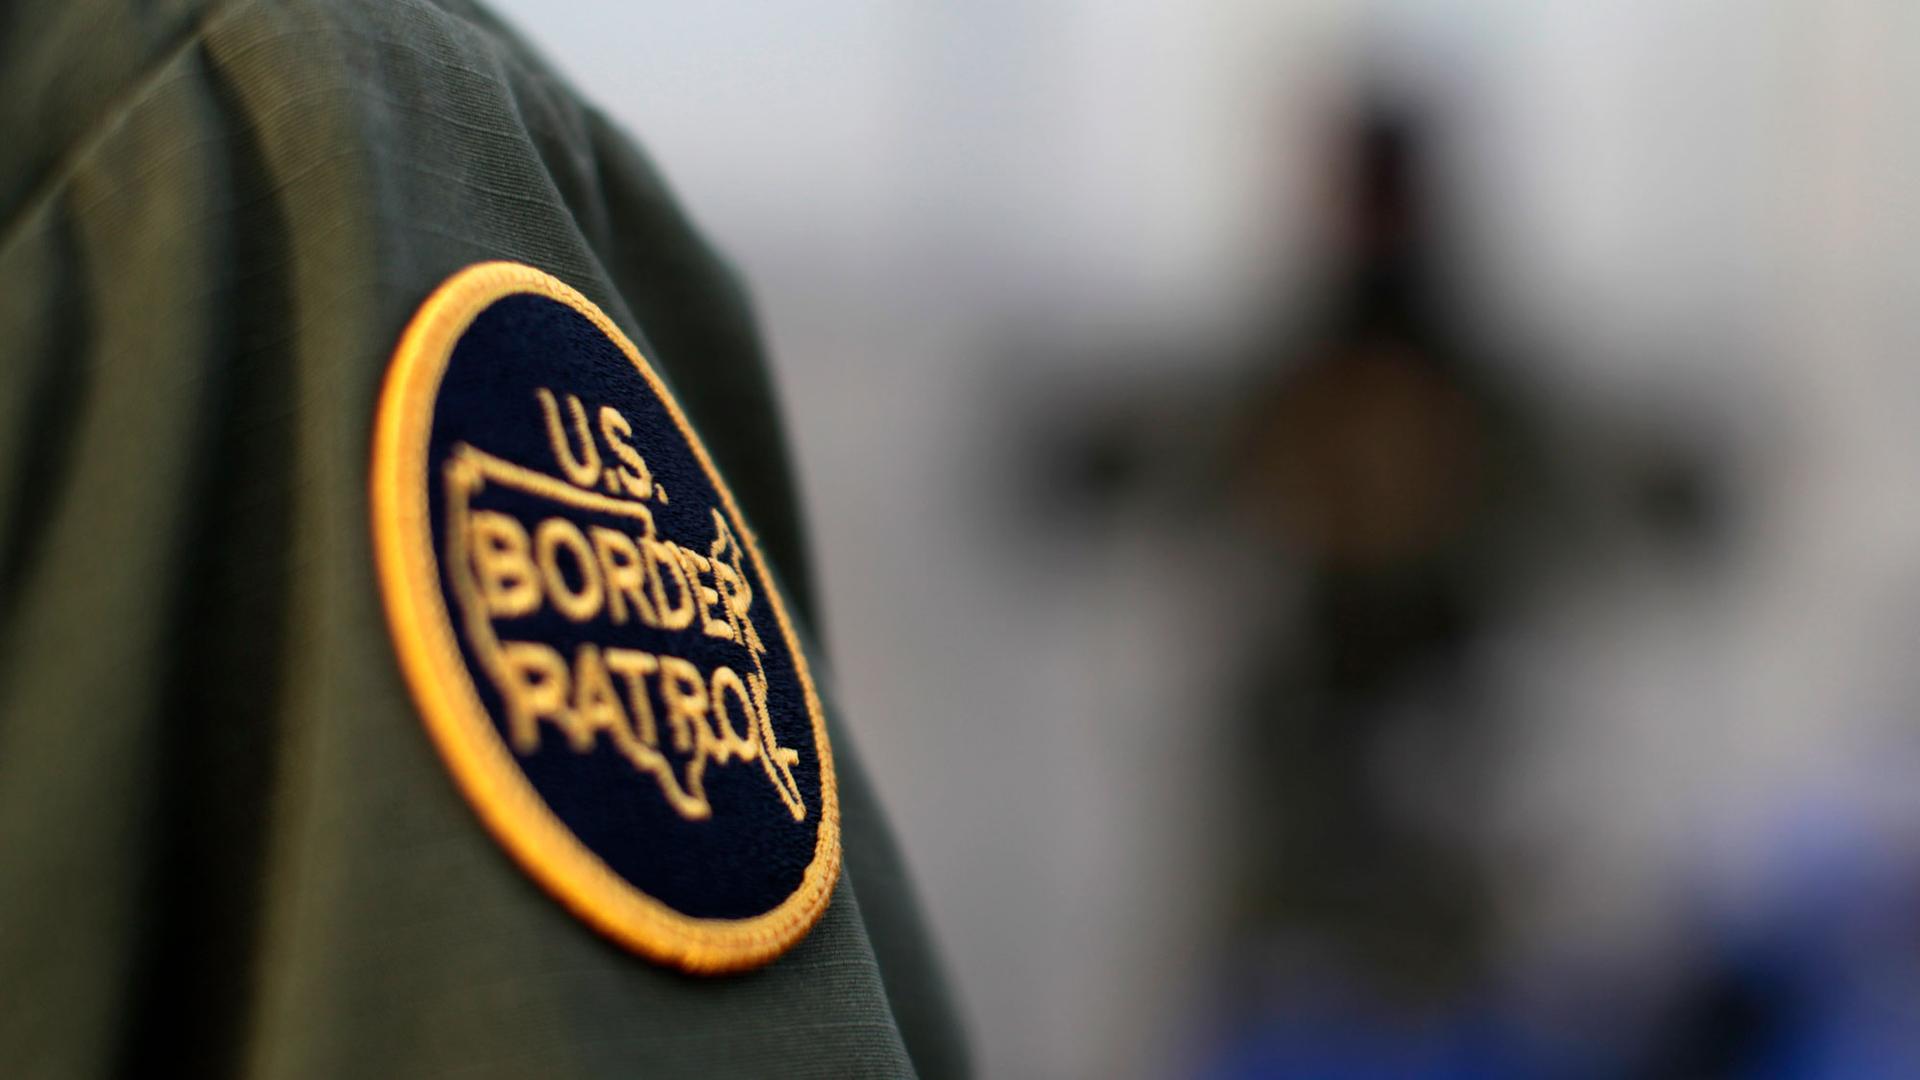 In this close-up photo, a logo patch is shown on the uniform of a US Border Patrol agent.